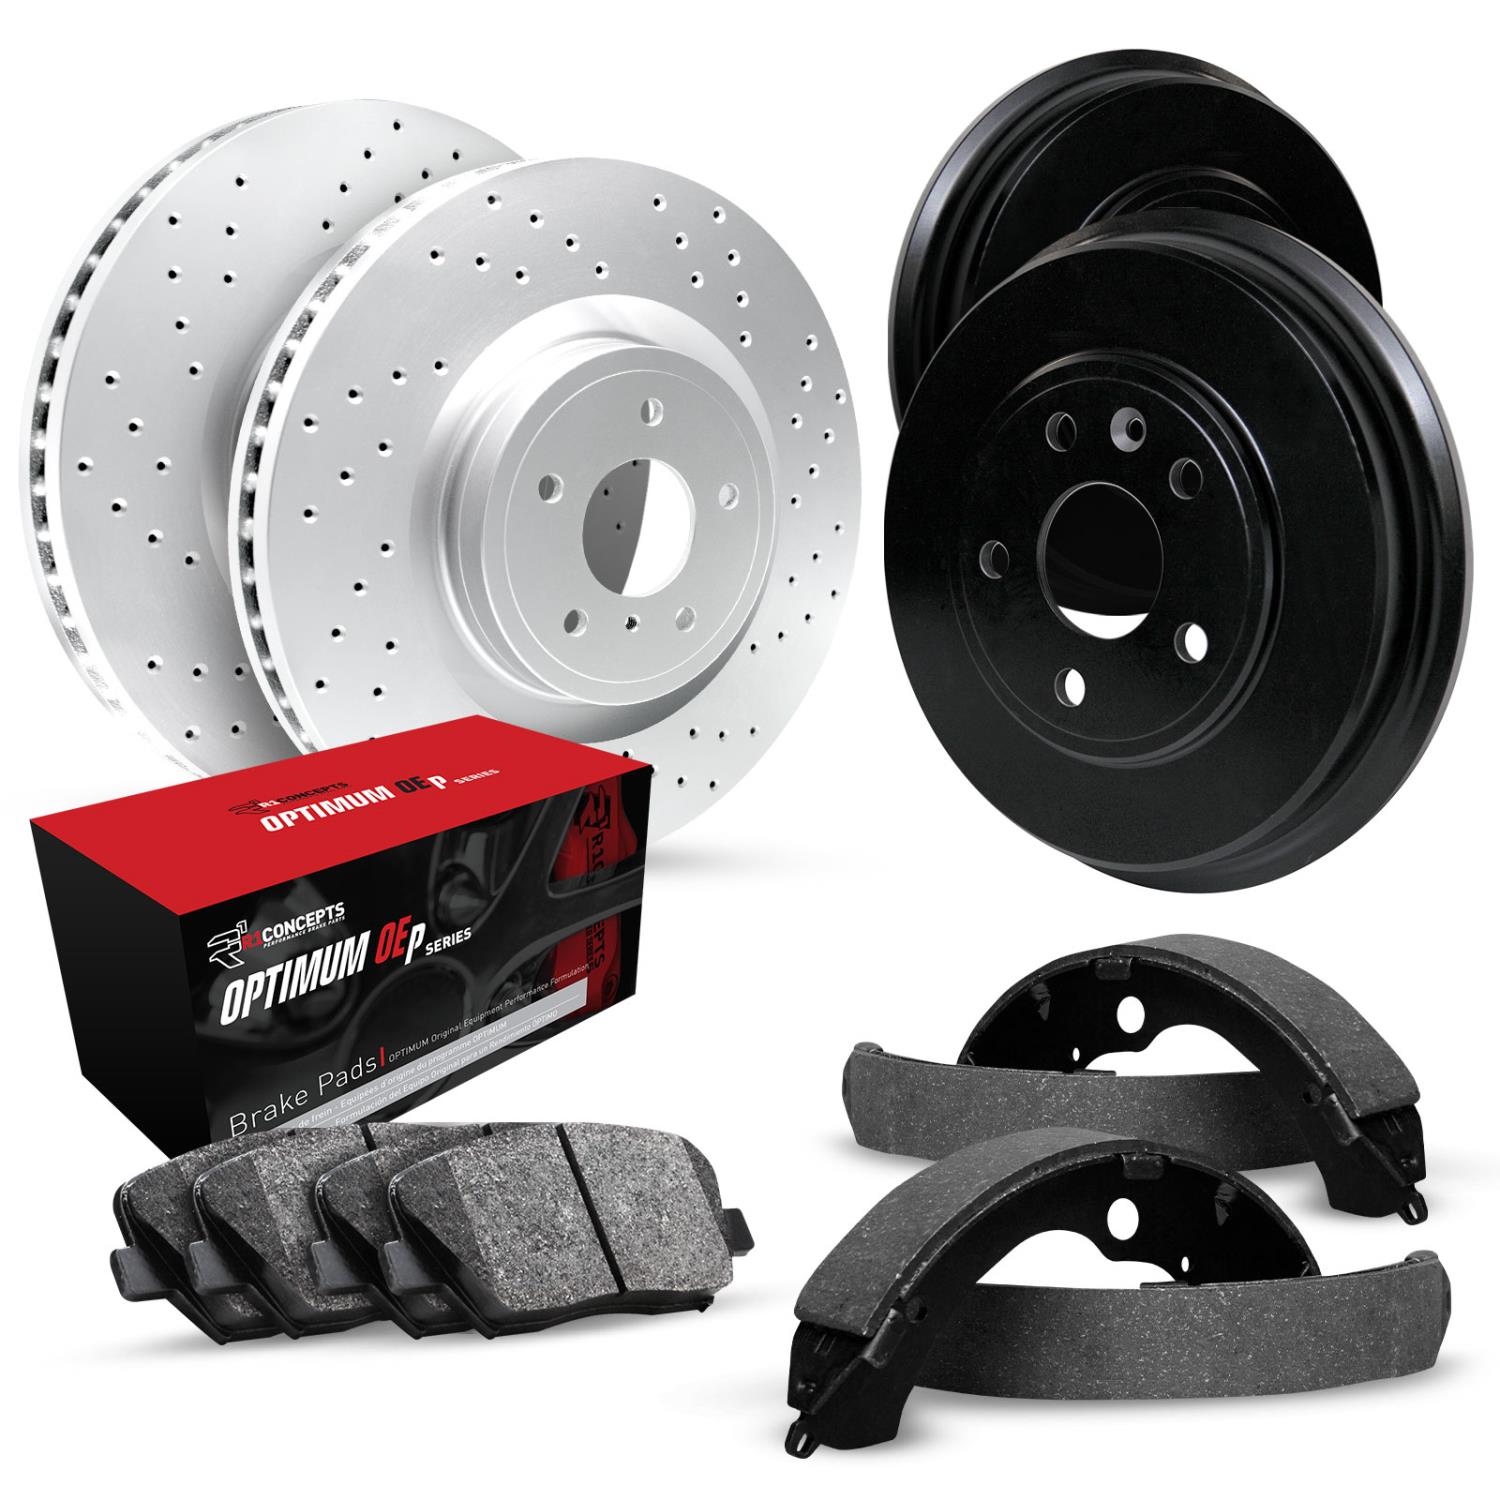 GEO-Carbon Drilled Brake Rotor & Drum Set w/Optimum OE Pads & Shoes, 2002-2007 GM, Position: Front & Rear